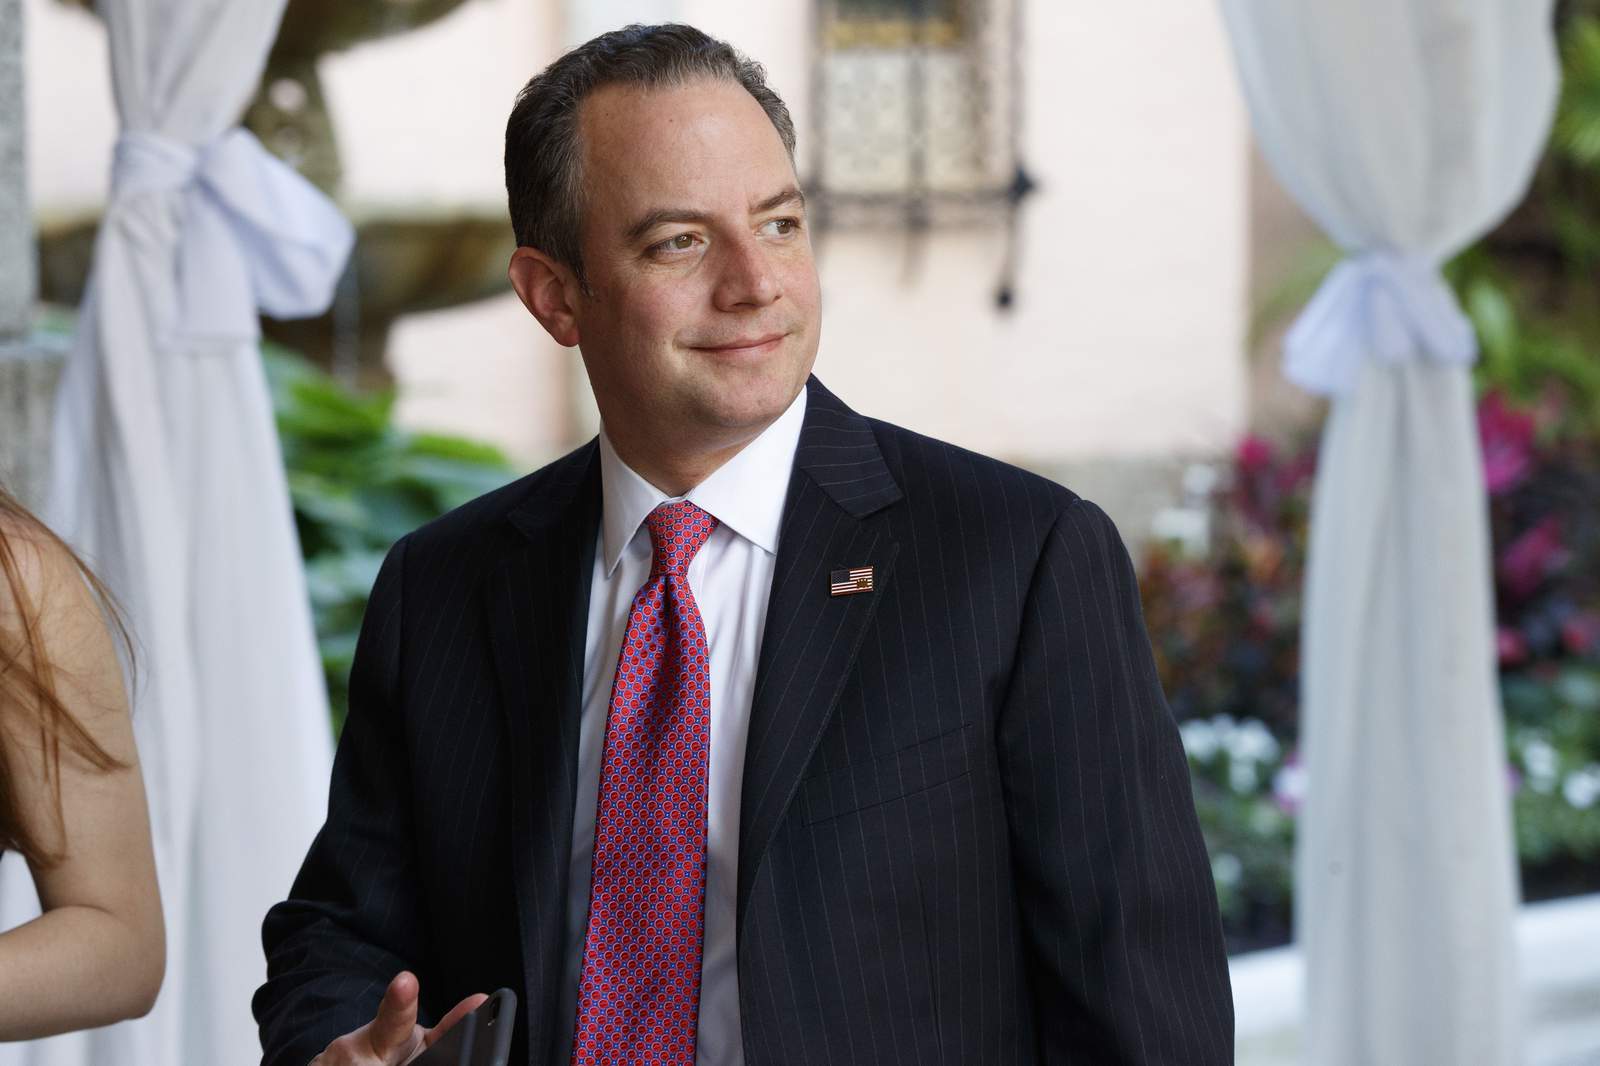 GOP source: Priebus mulling run for Wisconsin governor